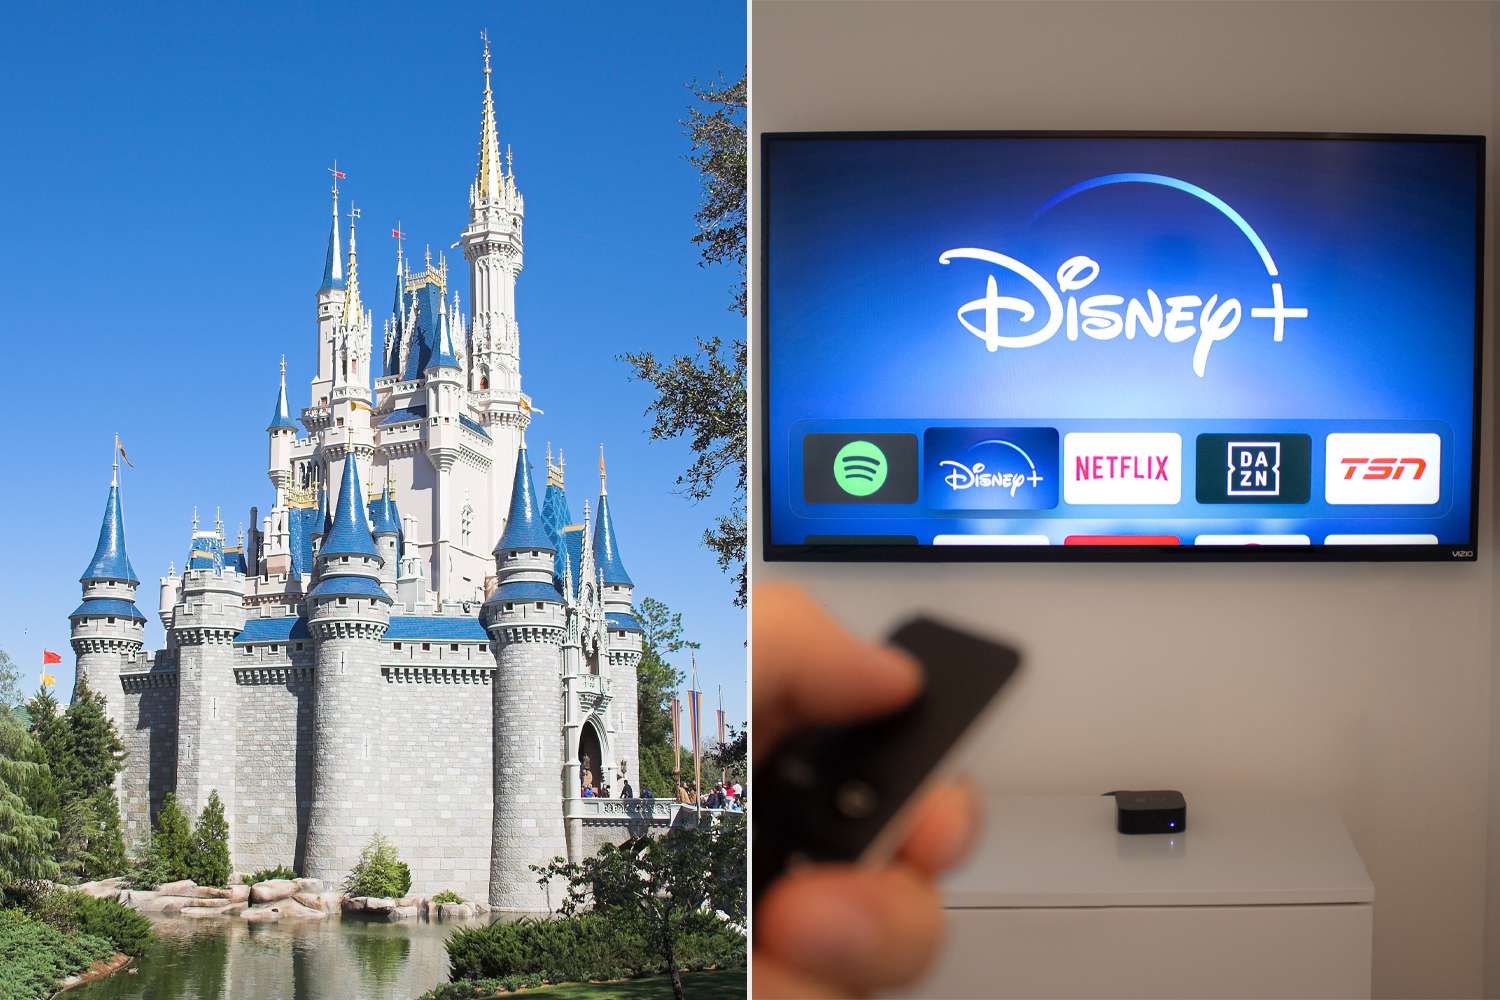 Say What Now? Family Purchases $10,000 in Gift Cards for Disney Vacation, Only to Realize They’re for Disney+